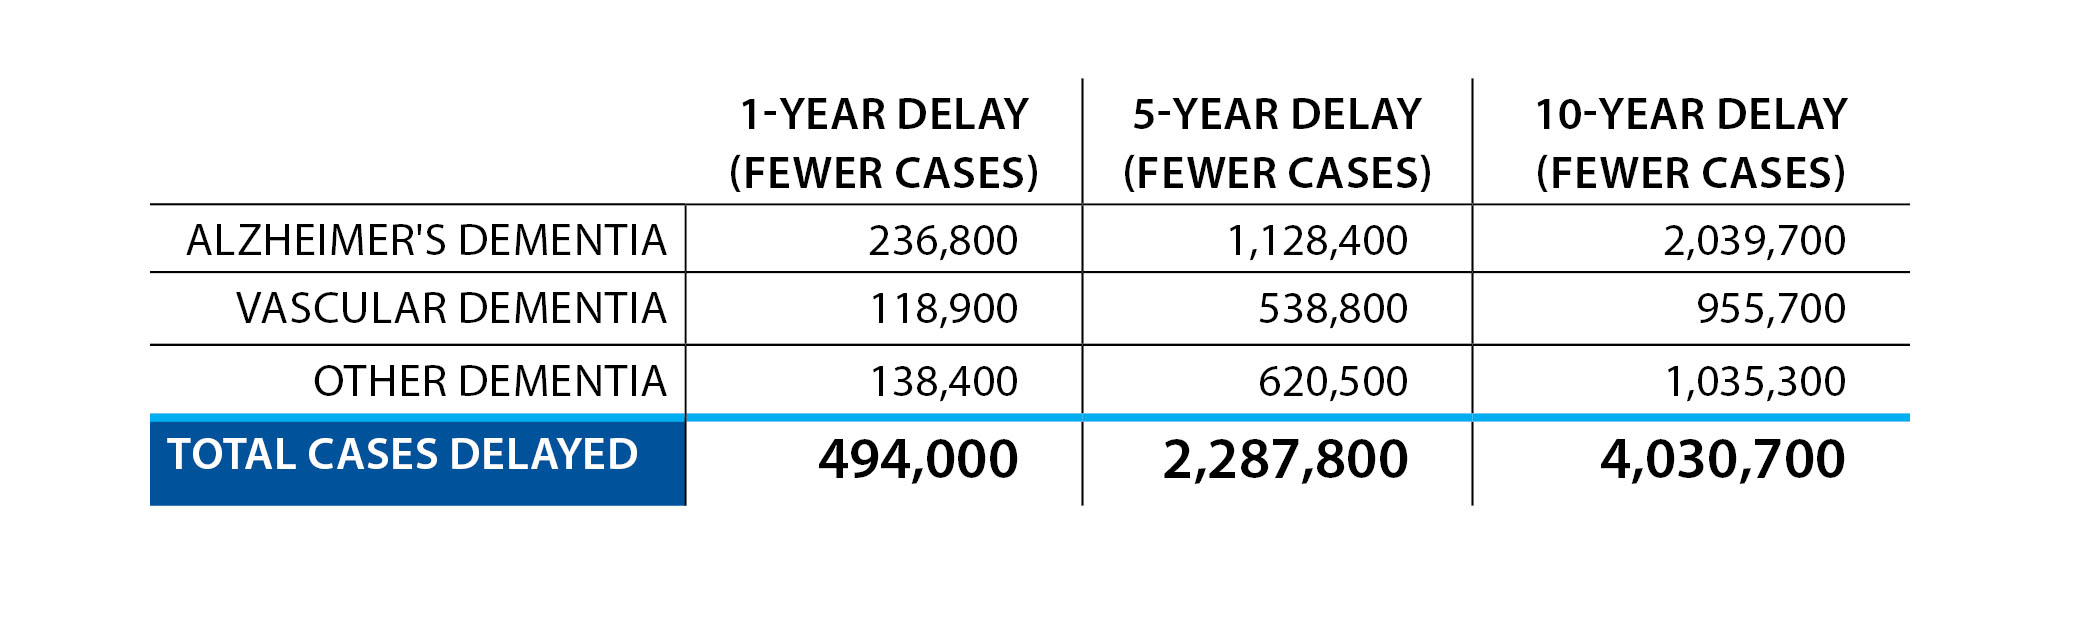 The number of individuals in Canada who would avoid dementia across the three scenarios where dementia onset is delayed by 1, 5 or 10 years